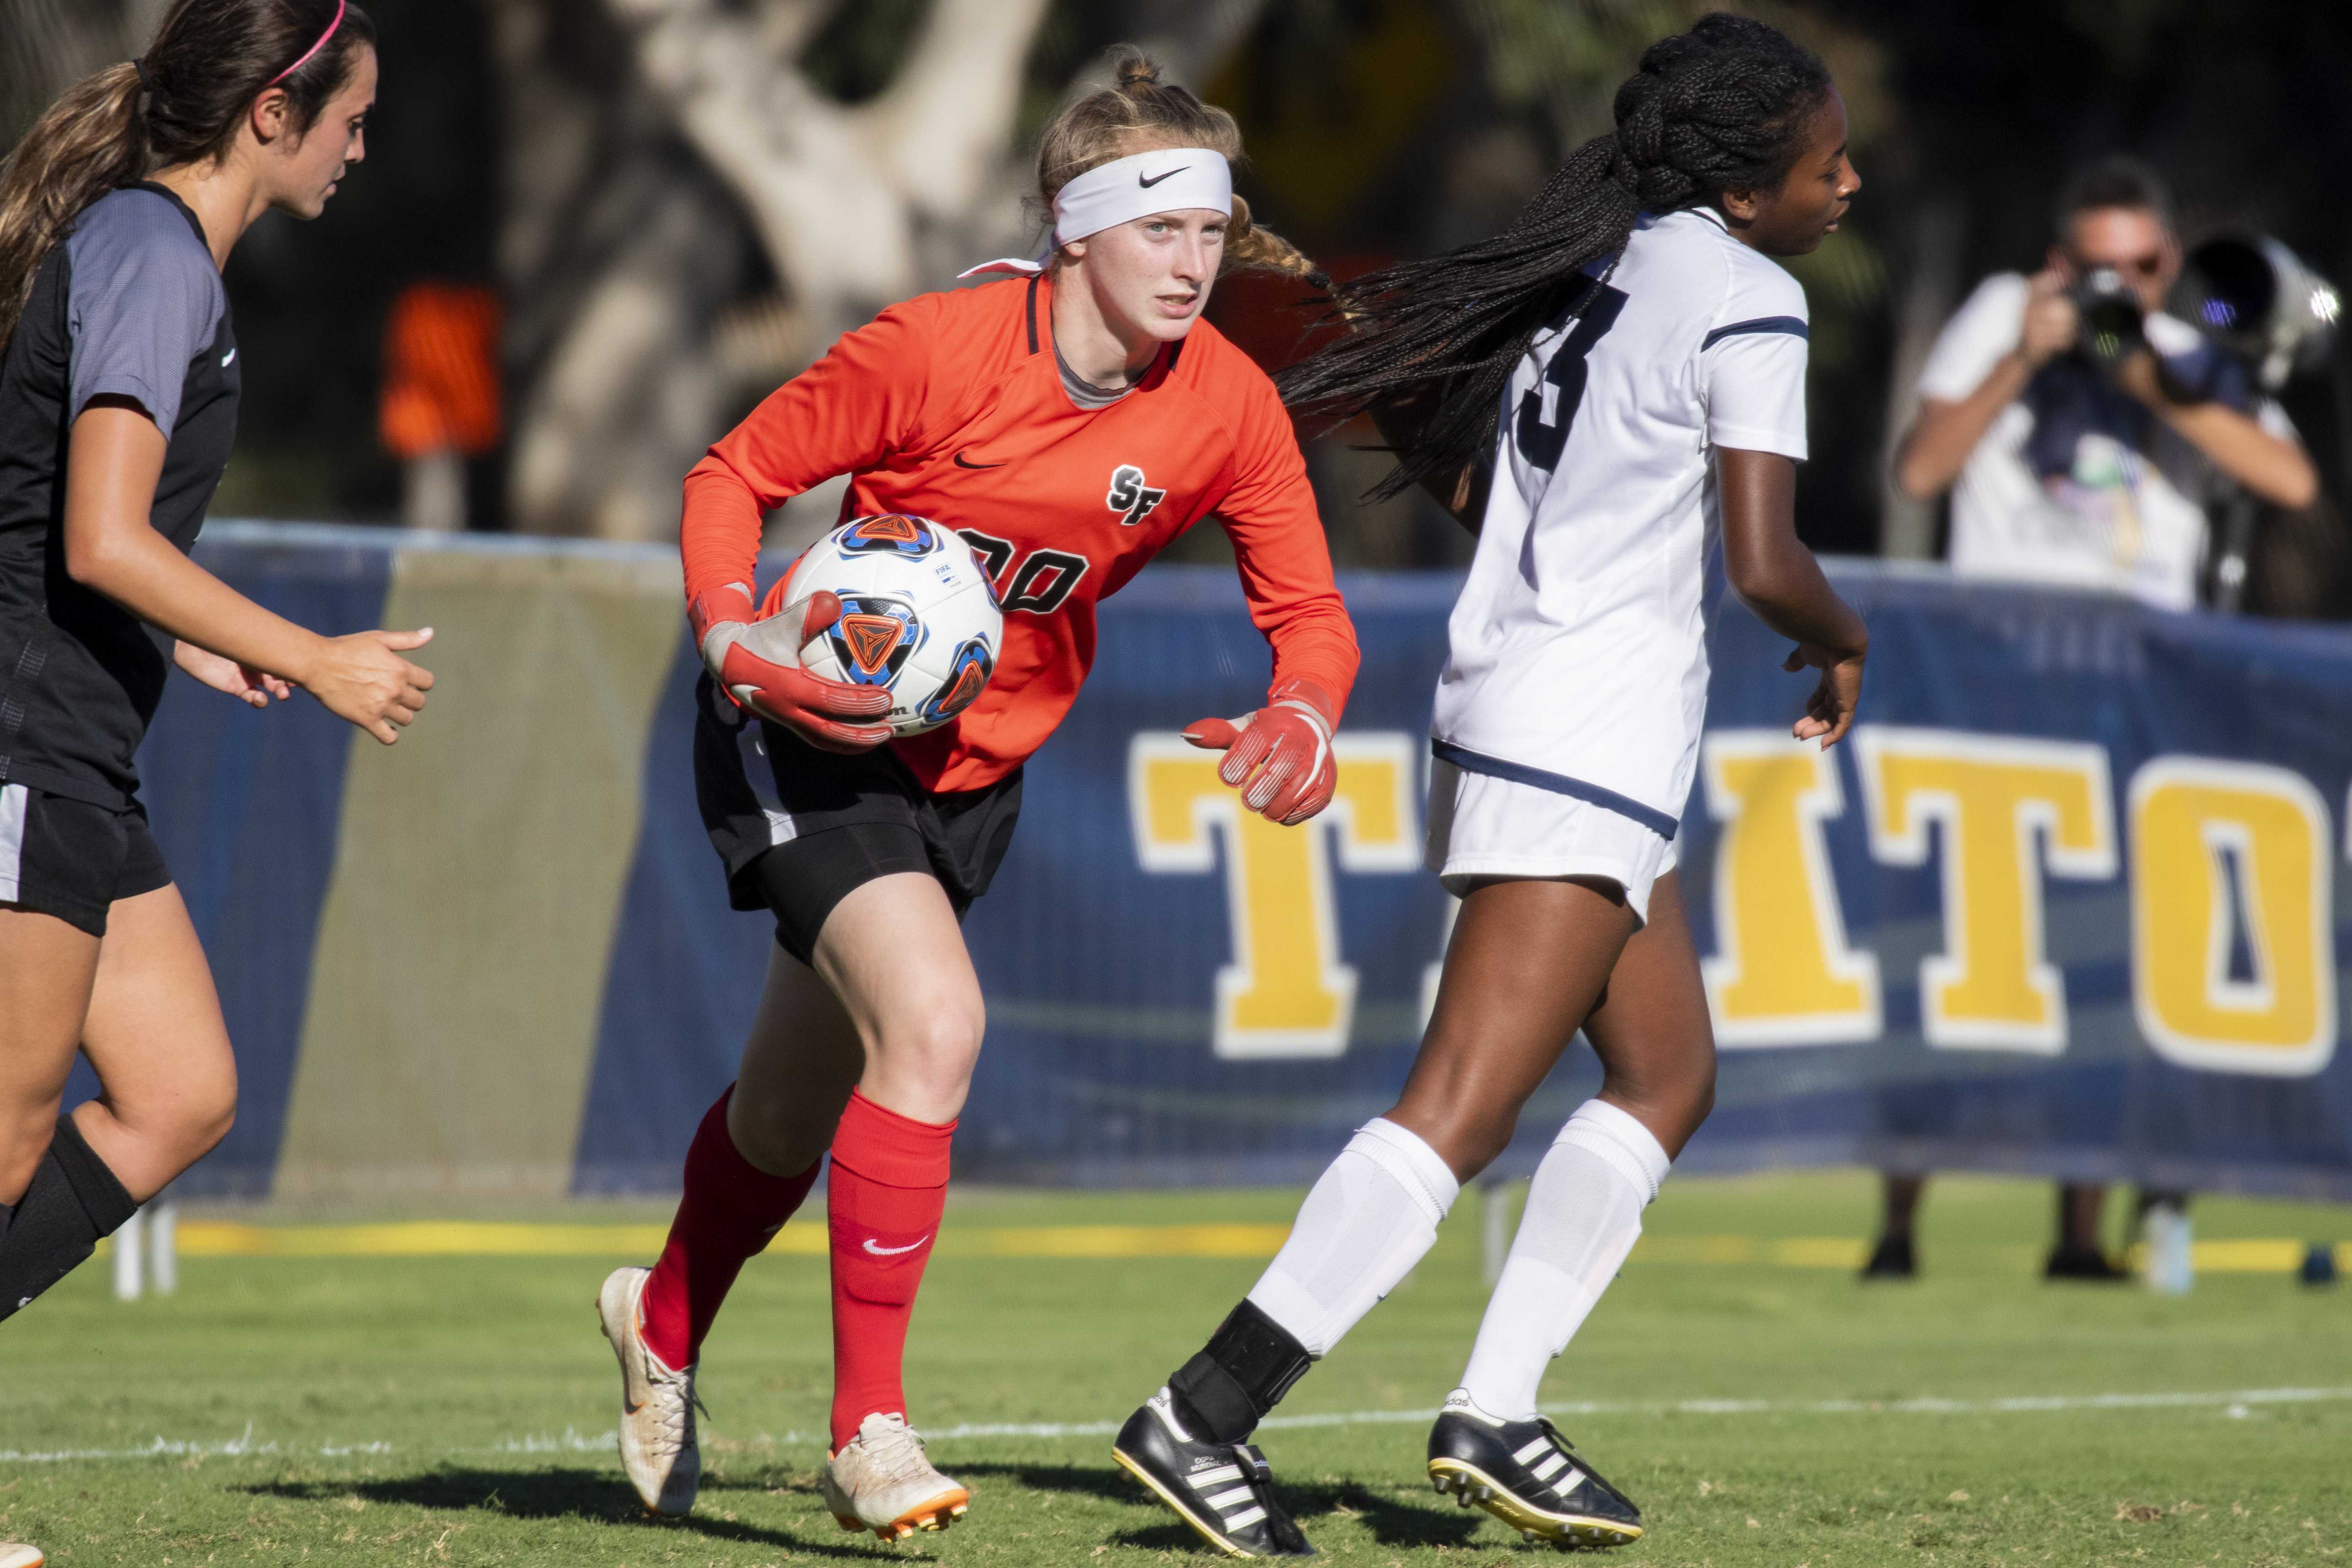 Gators eliminated in CCAA playoffs, fall to dominant UC San Diego